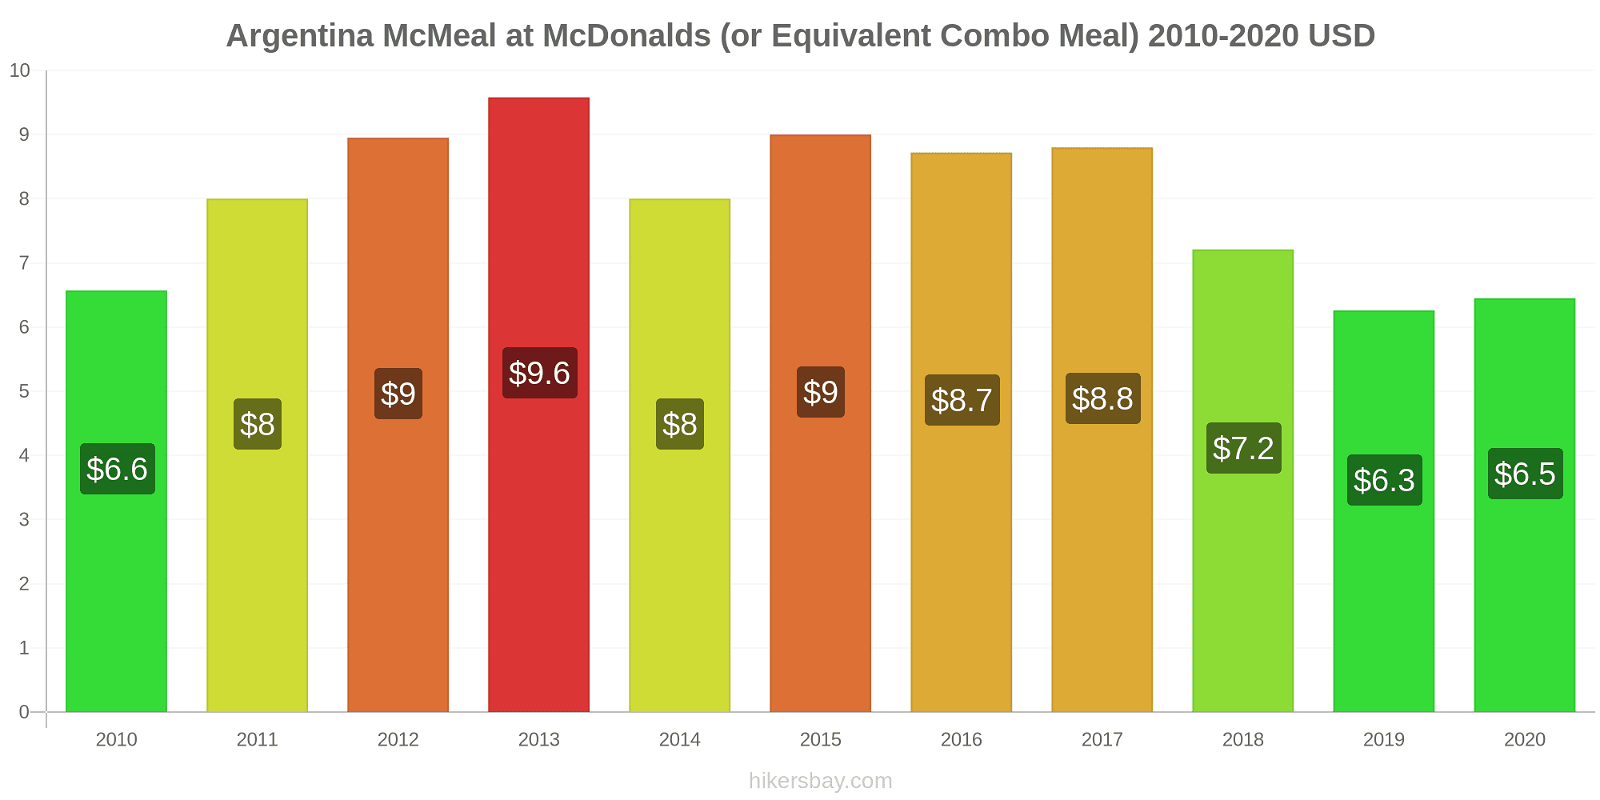 Argentina price changes McMeal at McDonalds (or Equivalent Combo Meal) hikersbay.com